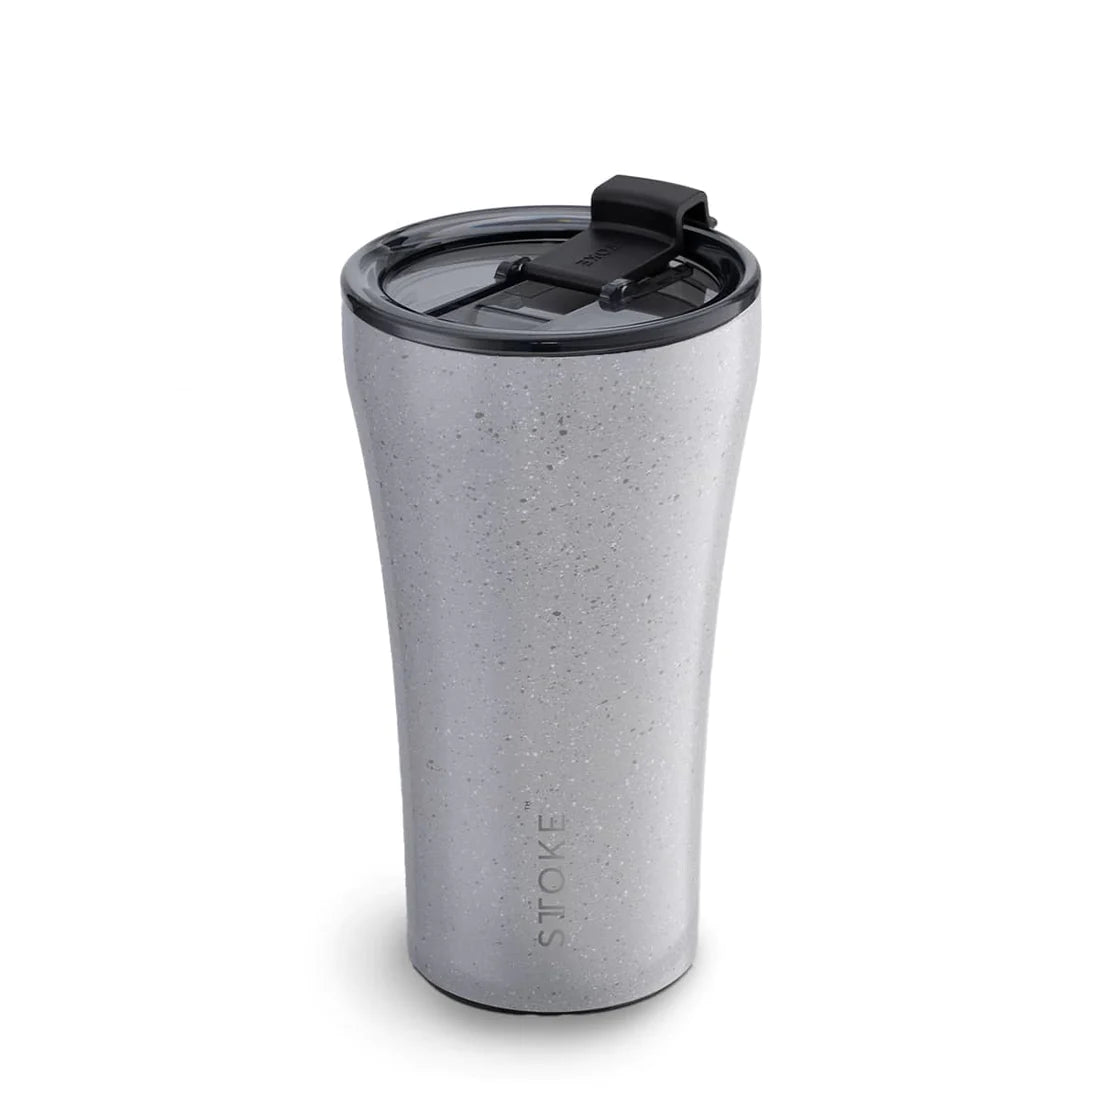 Sttoke Shatterproof, Ceramic, Insulated, Reusable Cup 12 oz (350ml)